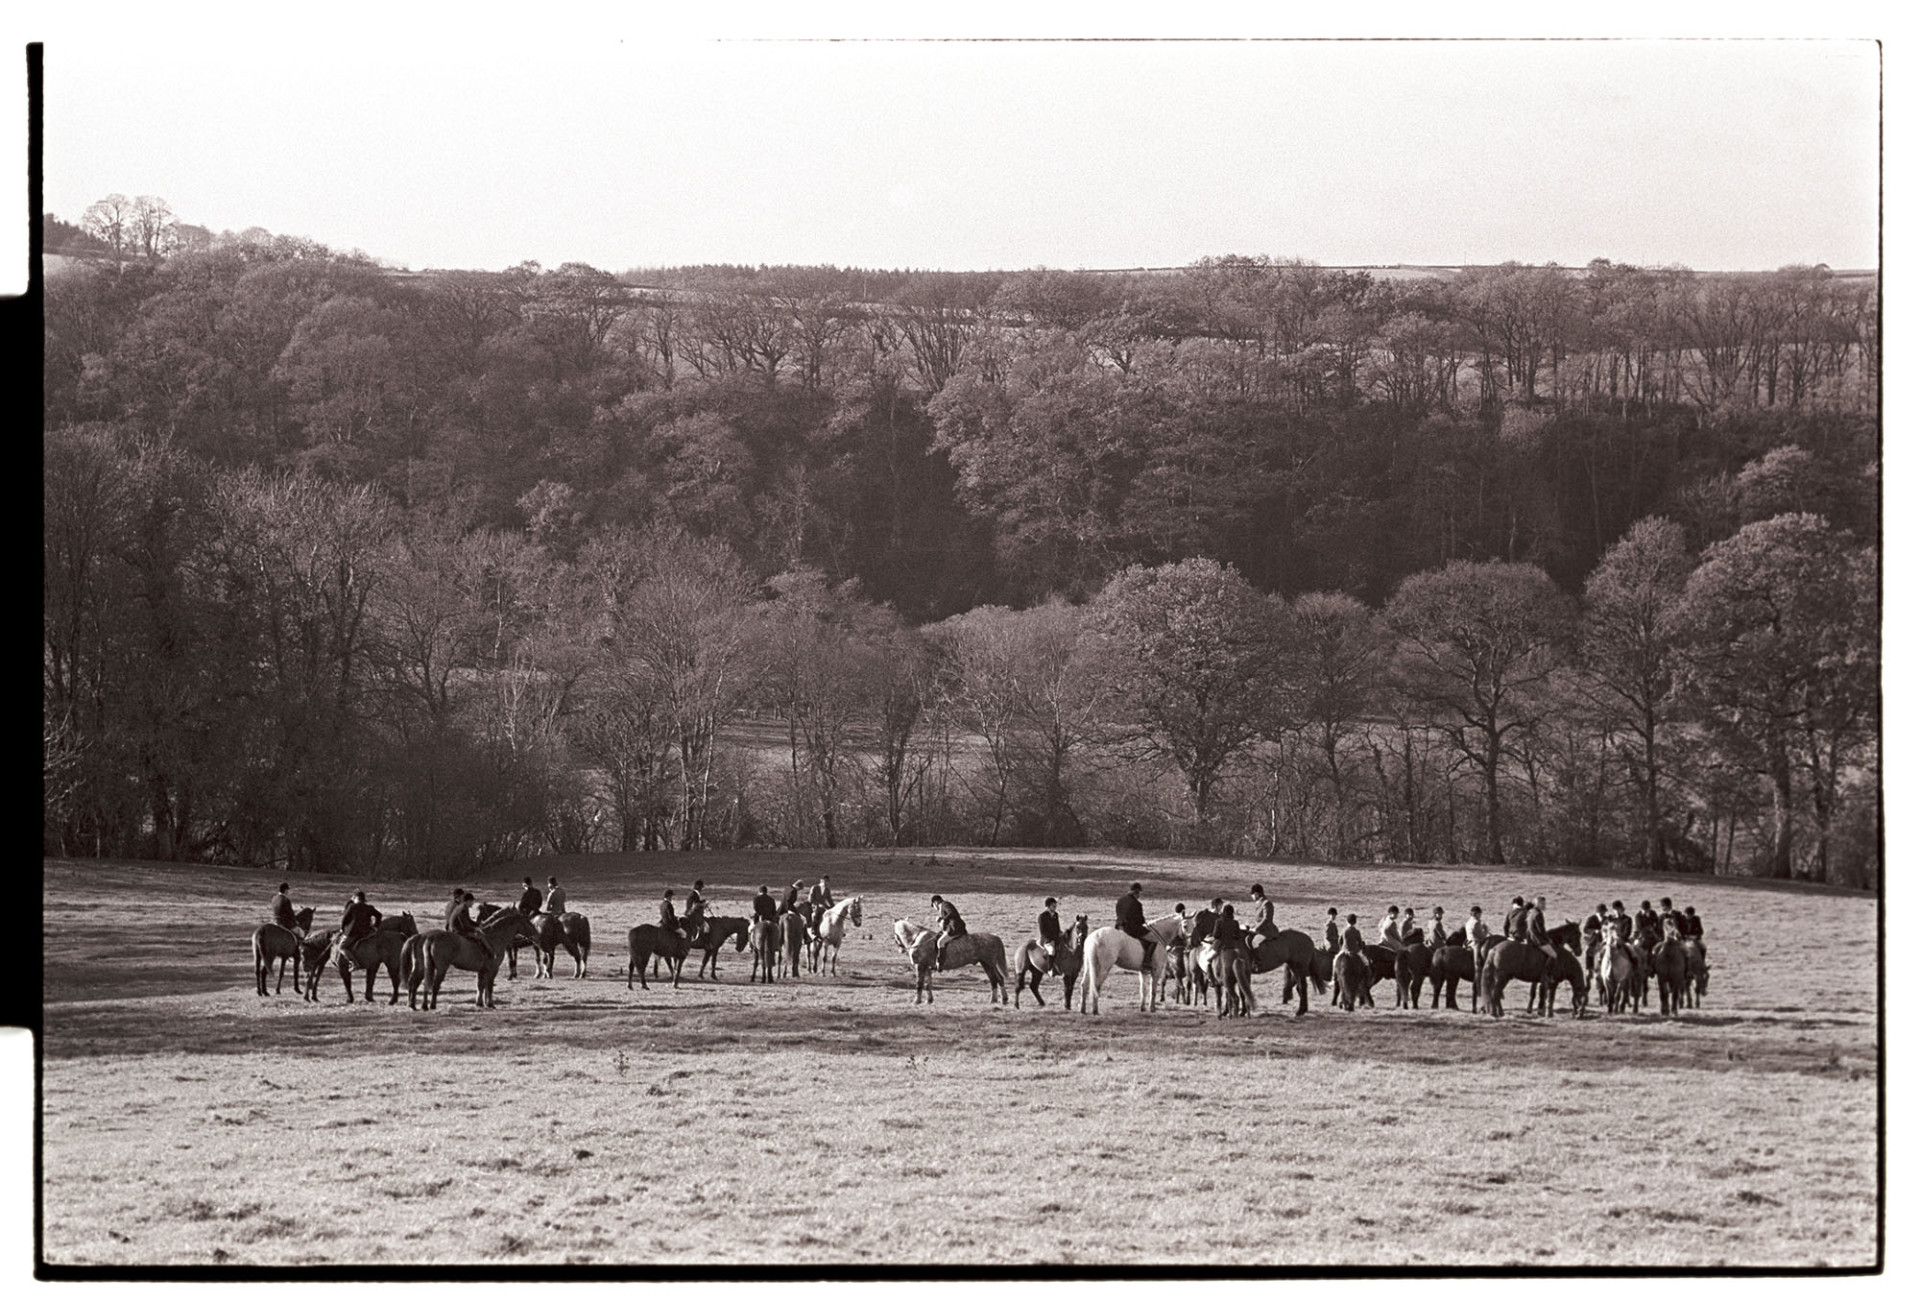 Hunters and horses waiting in field with woods behind. 
[Huntsmen and horses waiting in a field at Ashwell, Dolton for the hunt hounds to catch a scent. Trees and fields are visible in the background.]